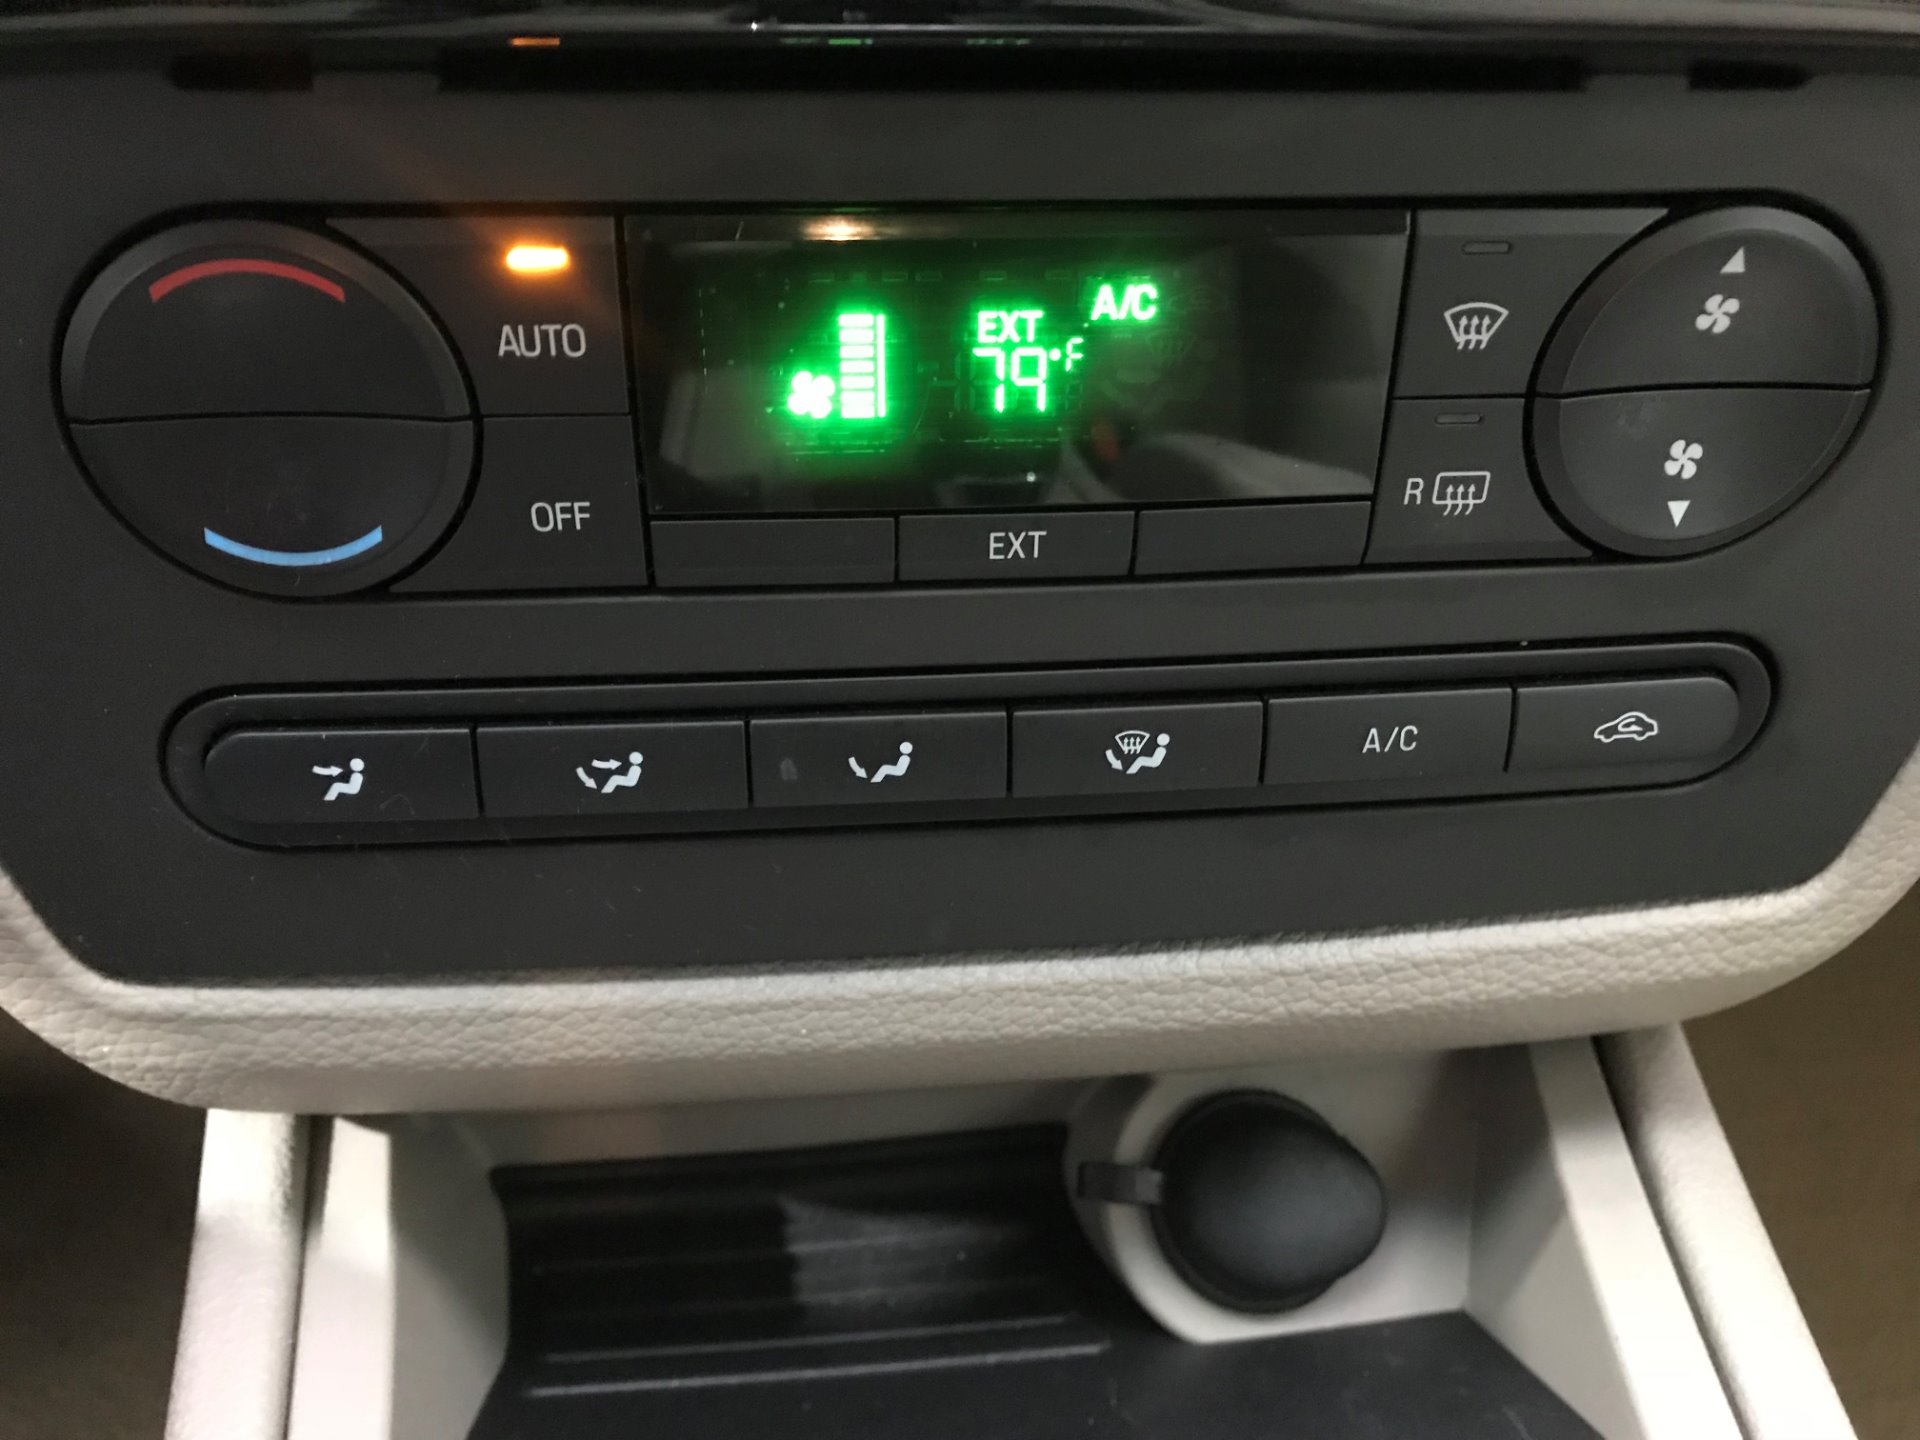 2006 ford fusion radio display not working